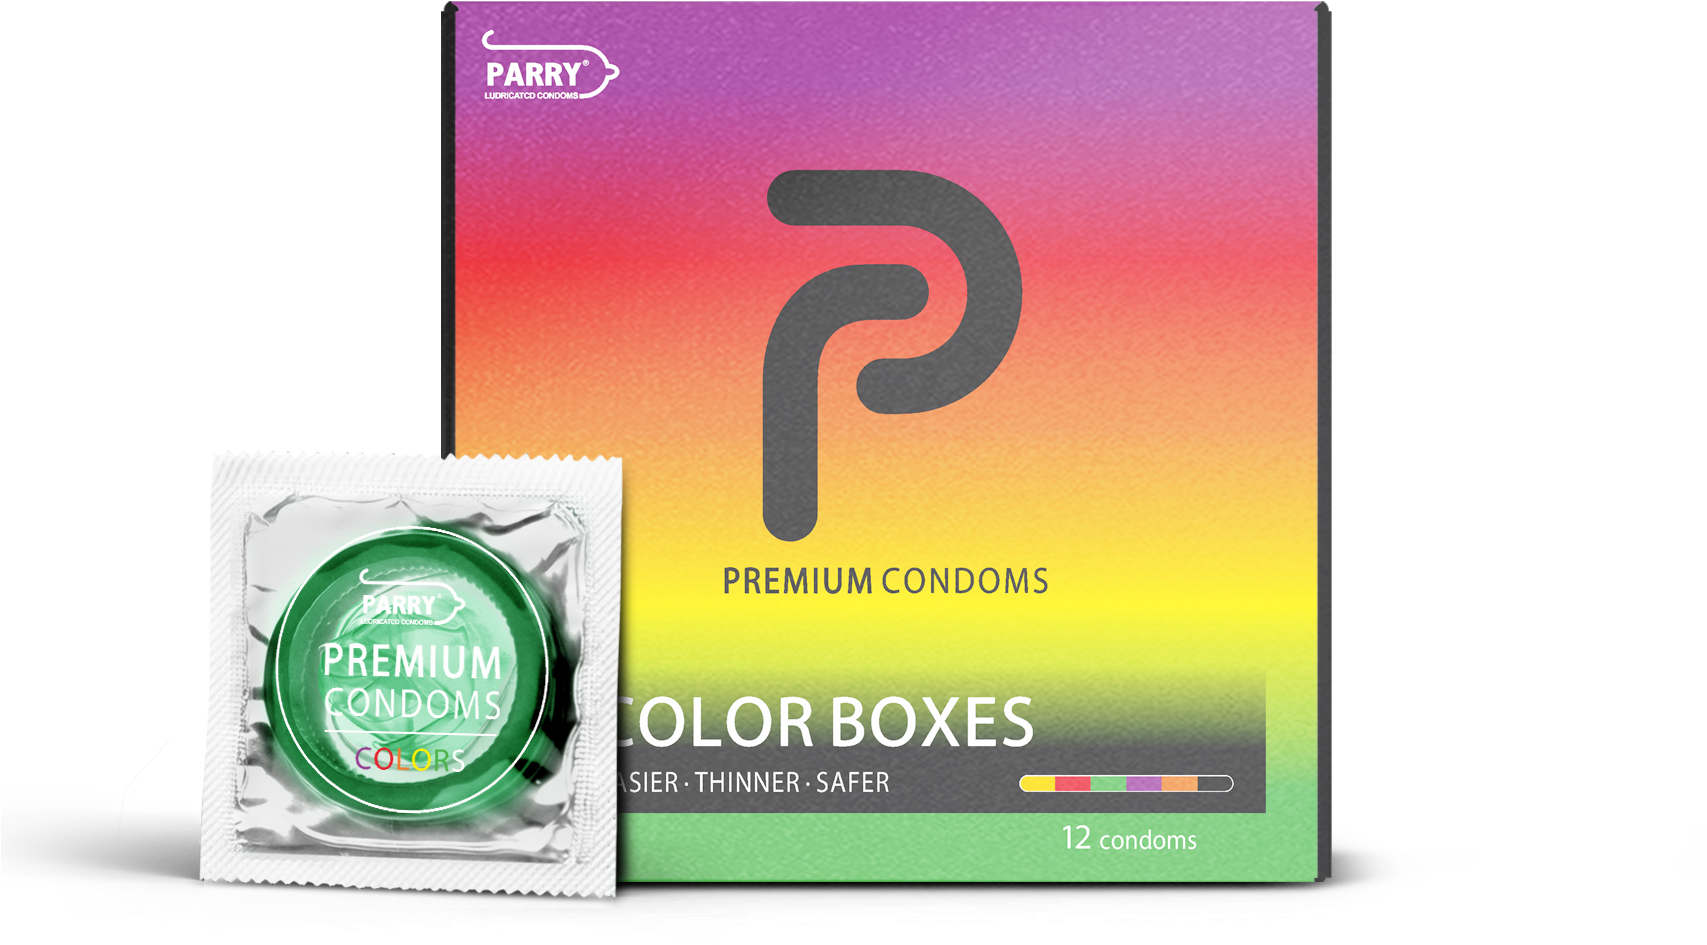 A Package Of Condoms And A Condom